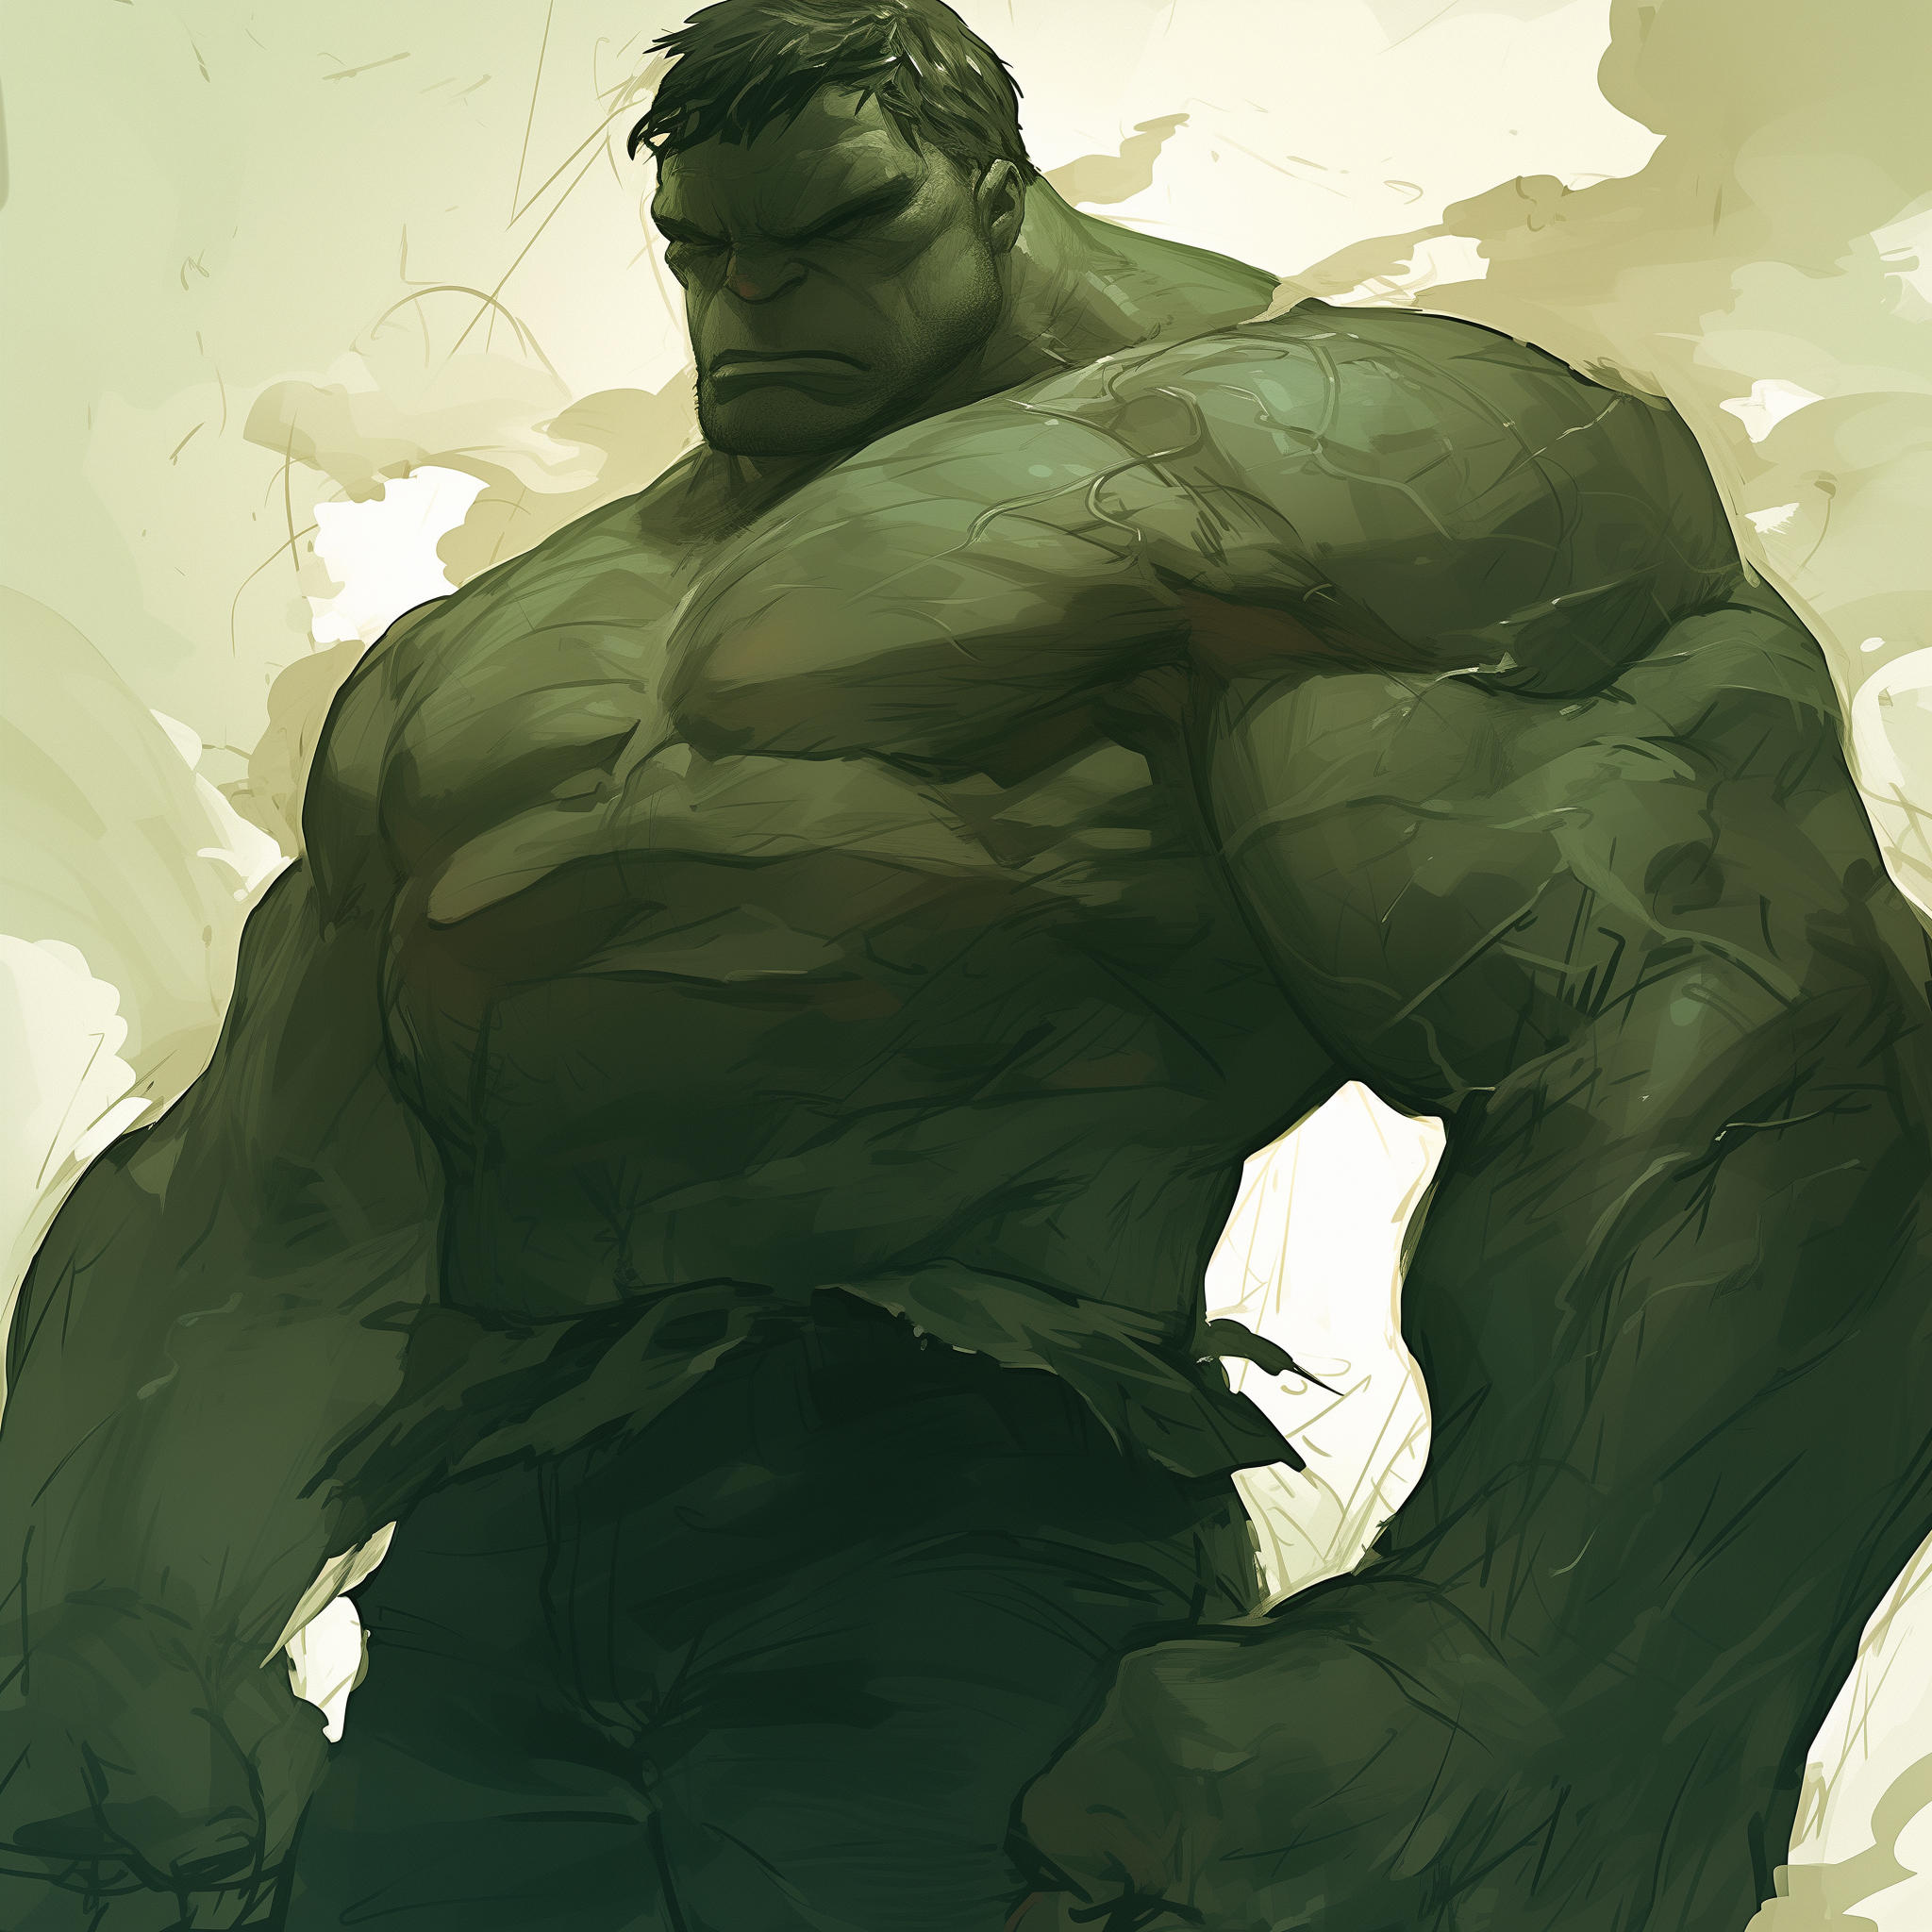 Avatar of the Incredible Hulk from Marvel Comics, showcasing the powerful superhero in a dominant stance.